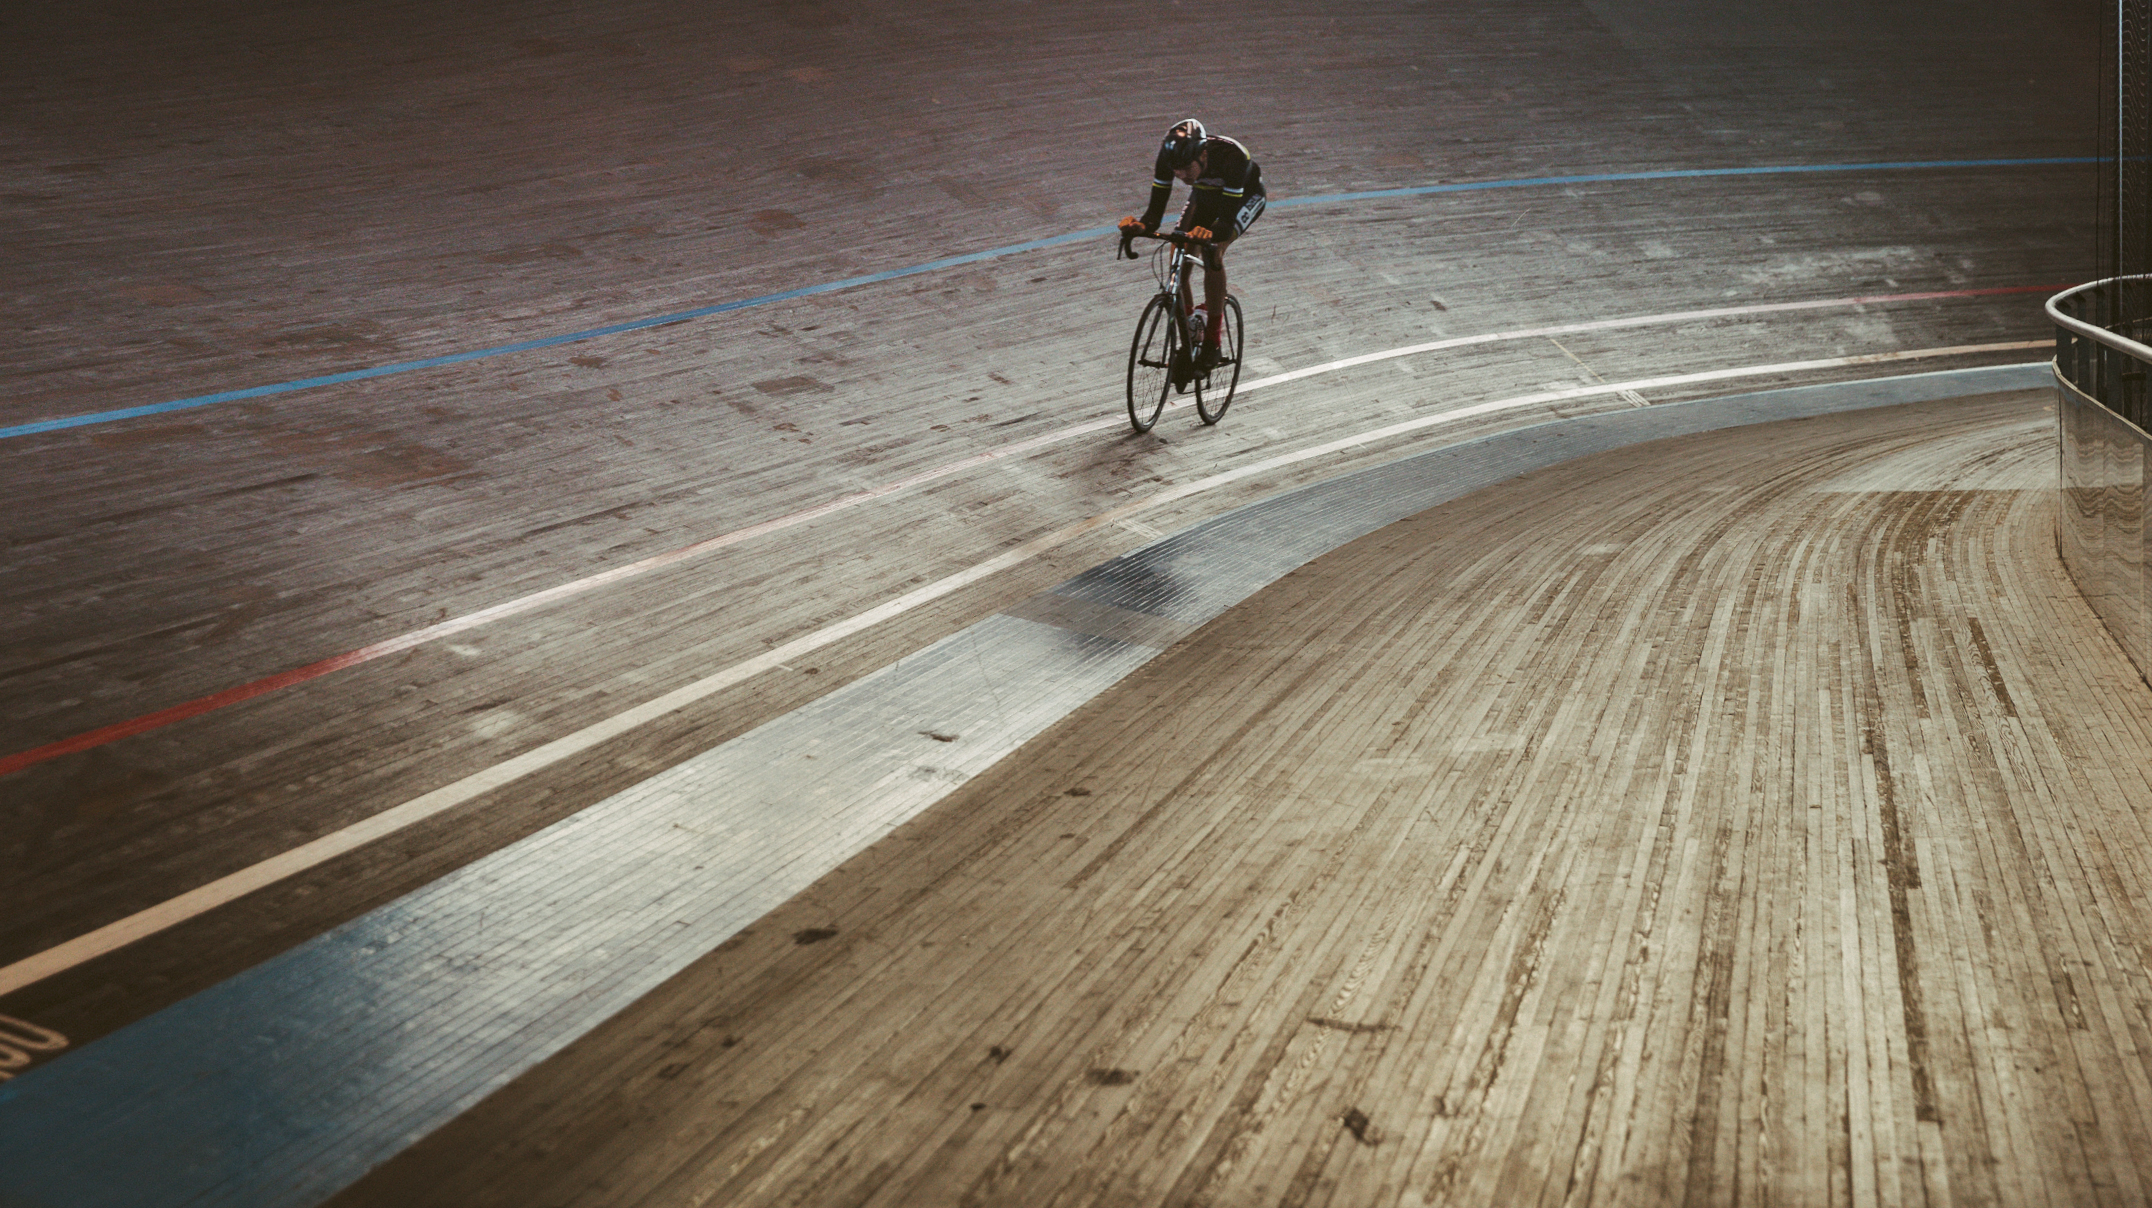 indoor cycling track